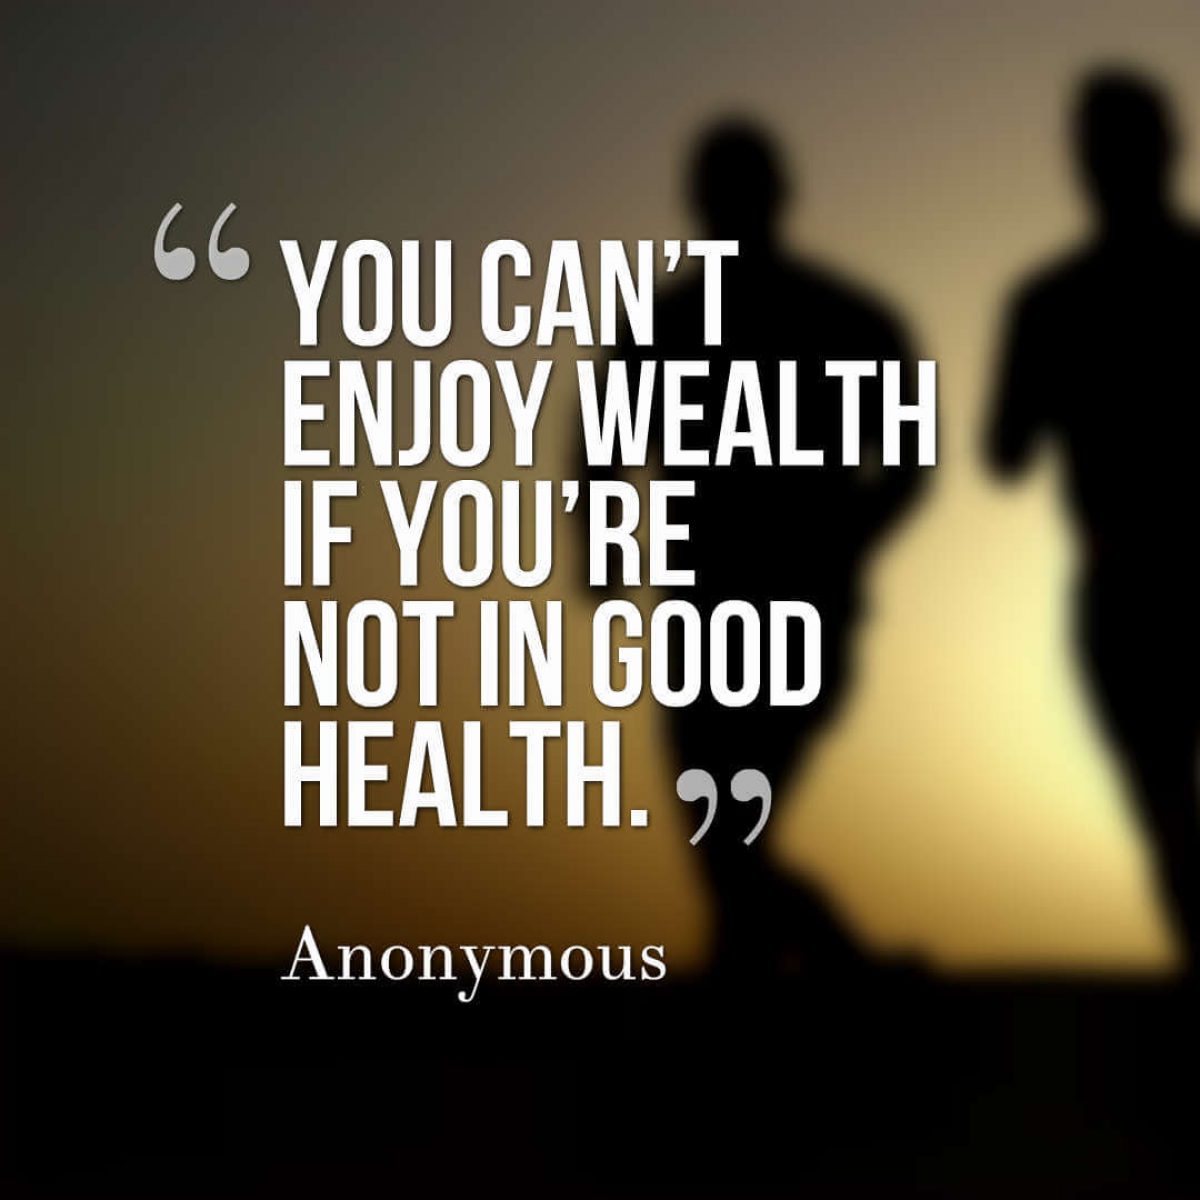 you can’t enjoy wealth if you’re not in good health